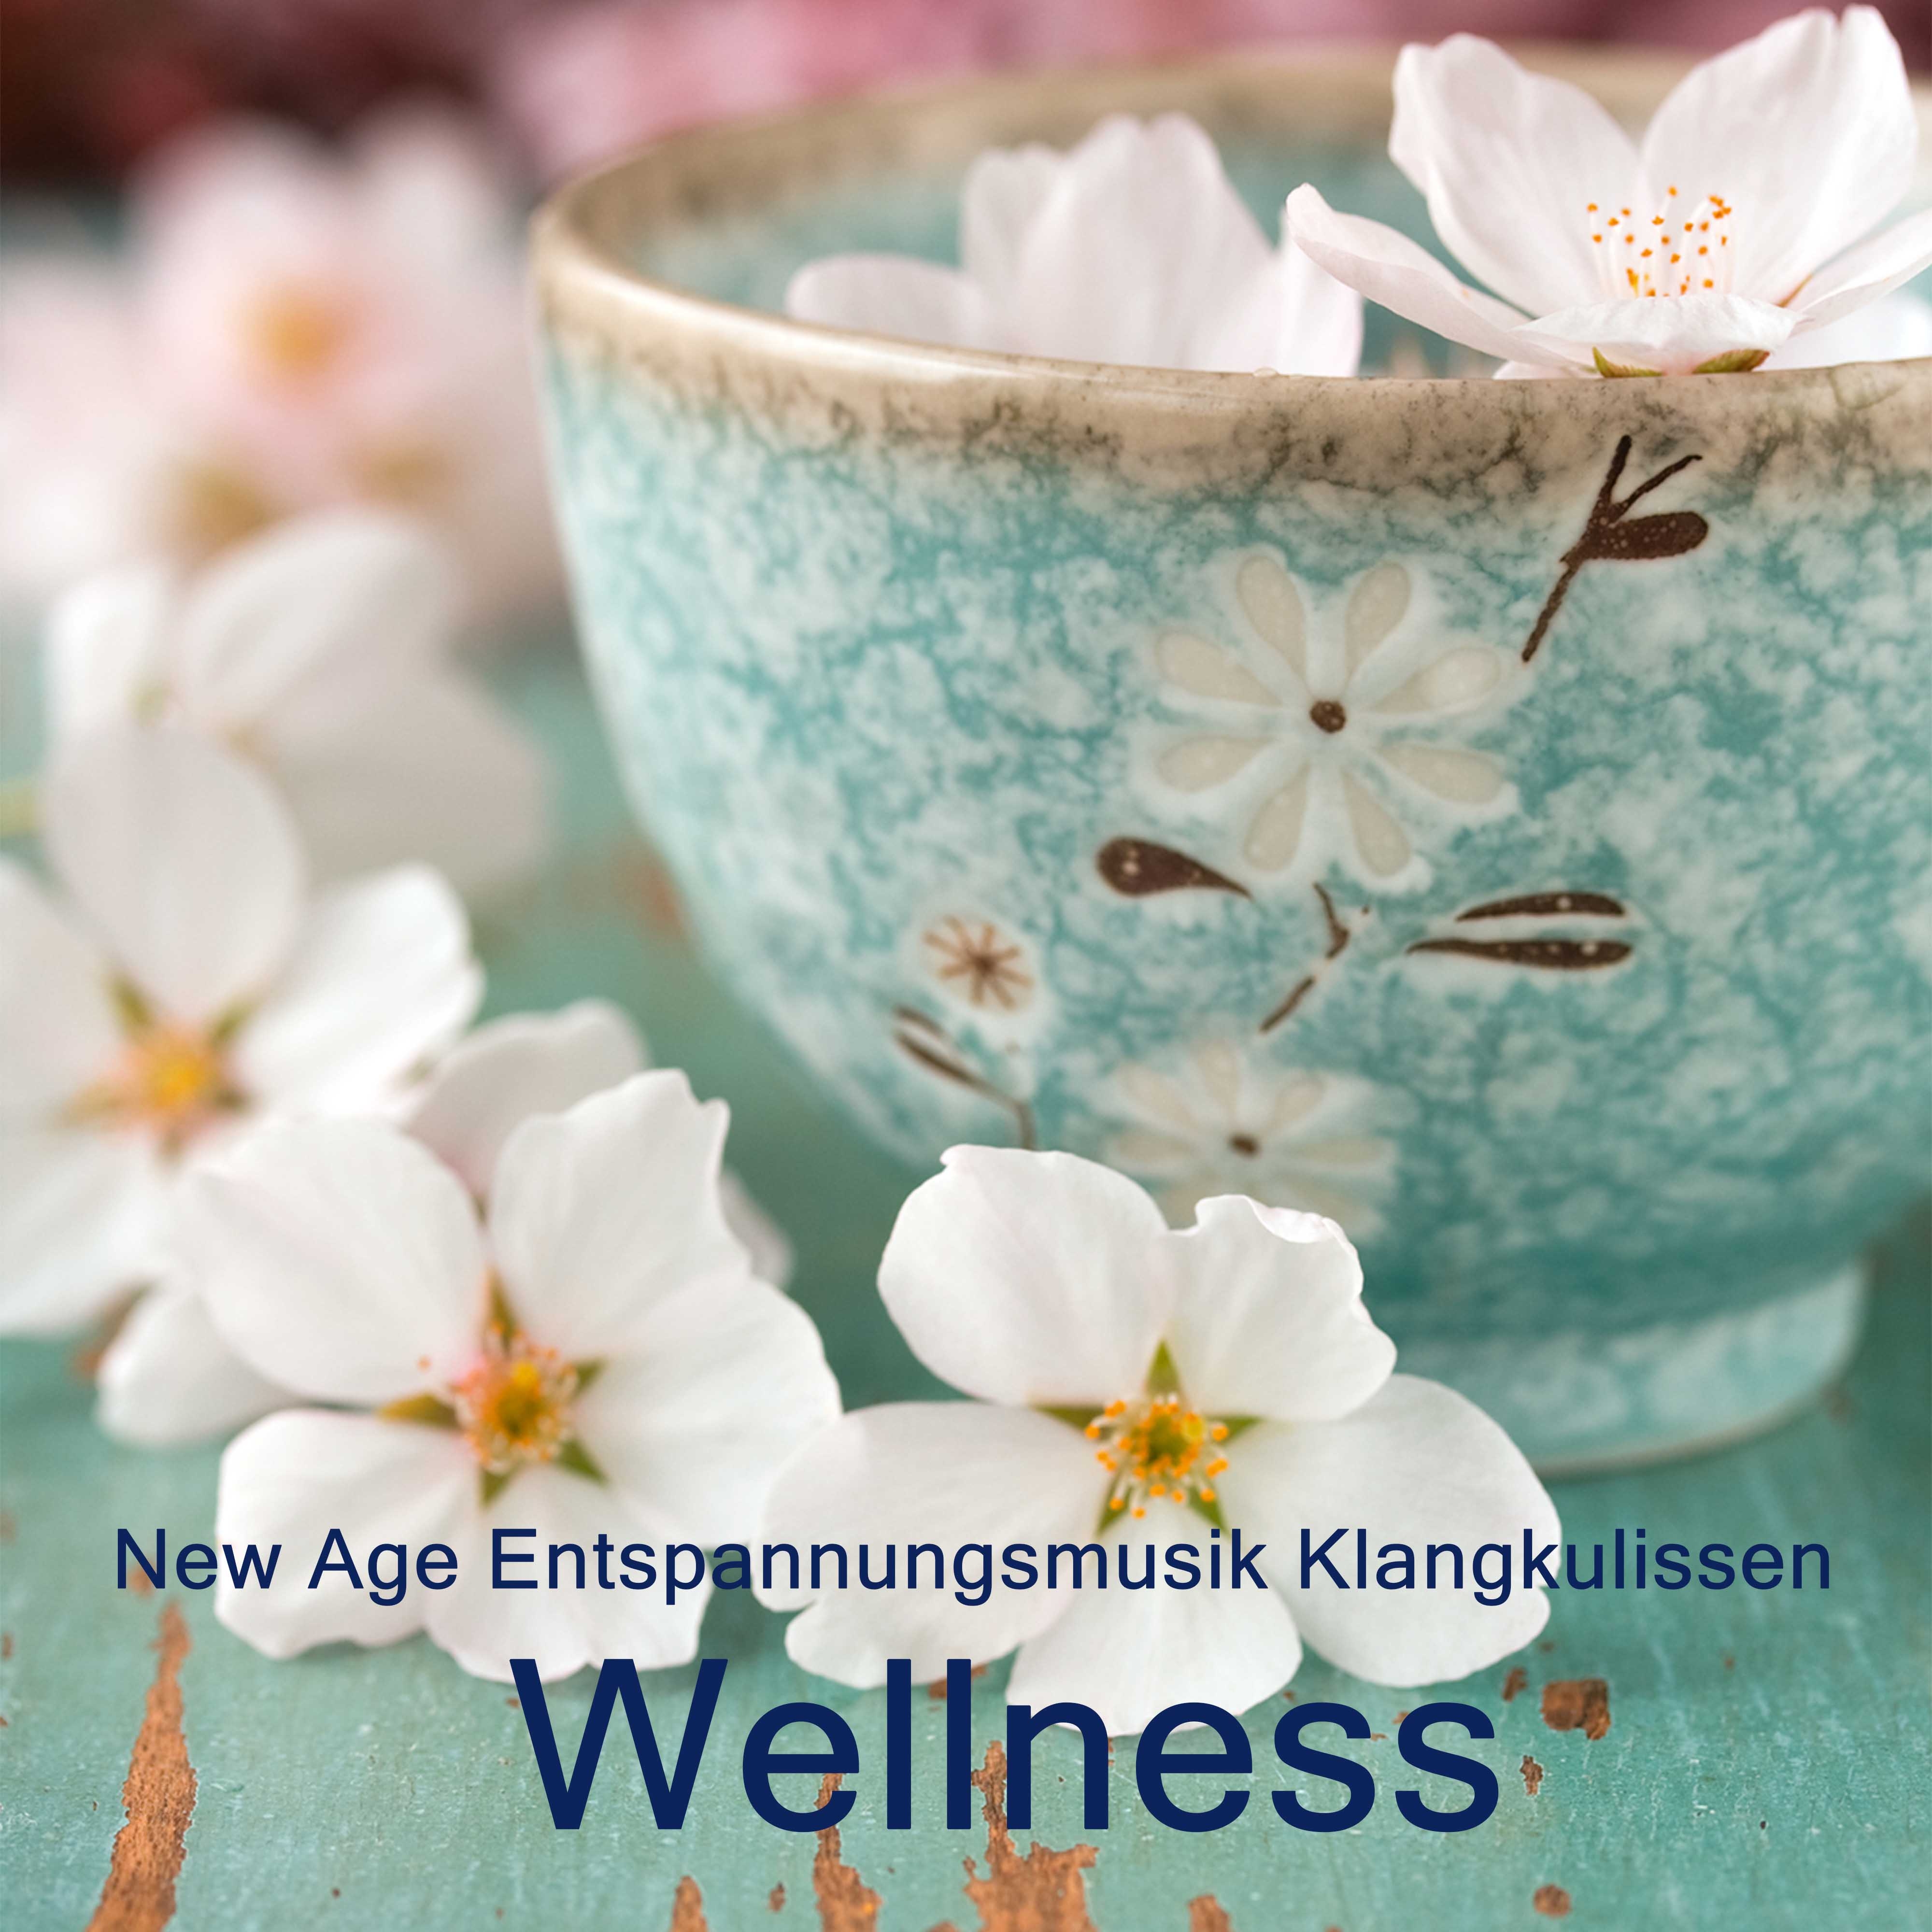 Wellness: New Age Entspannungsmusik Klangkulissen, Relaxing Spa Sounds